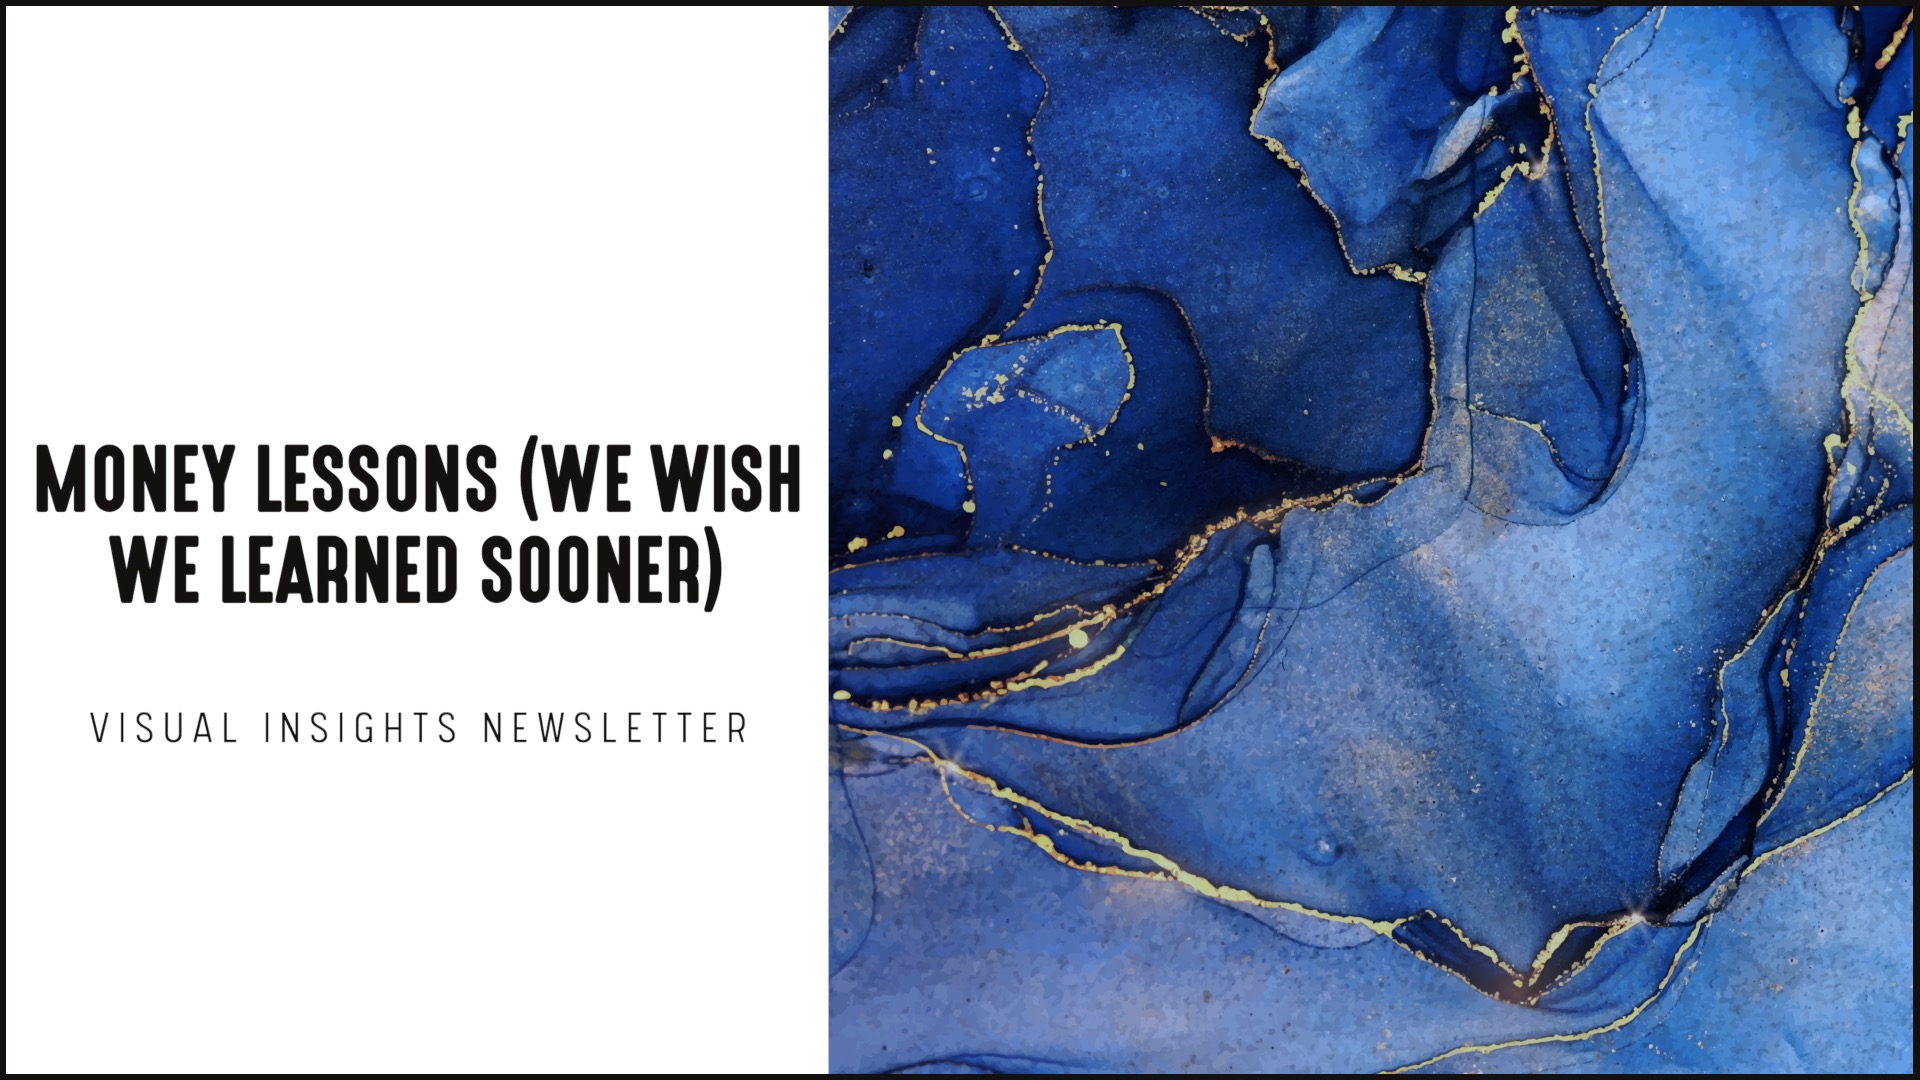 [NEW] Visual Insights Newsletter | Money Lessons We Wish We Learned Sooner